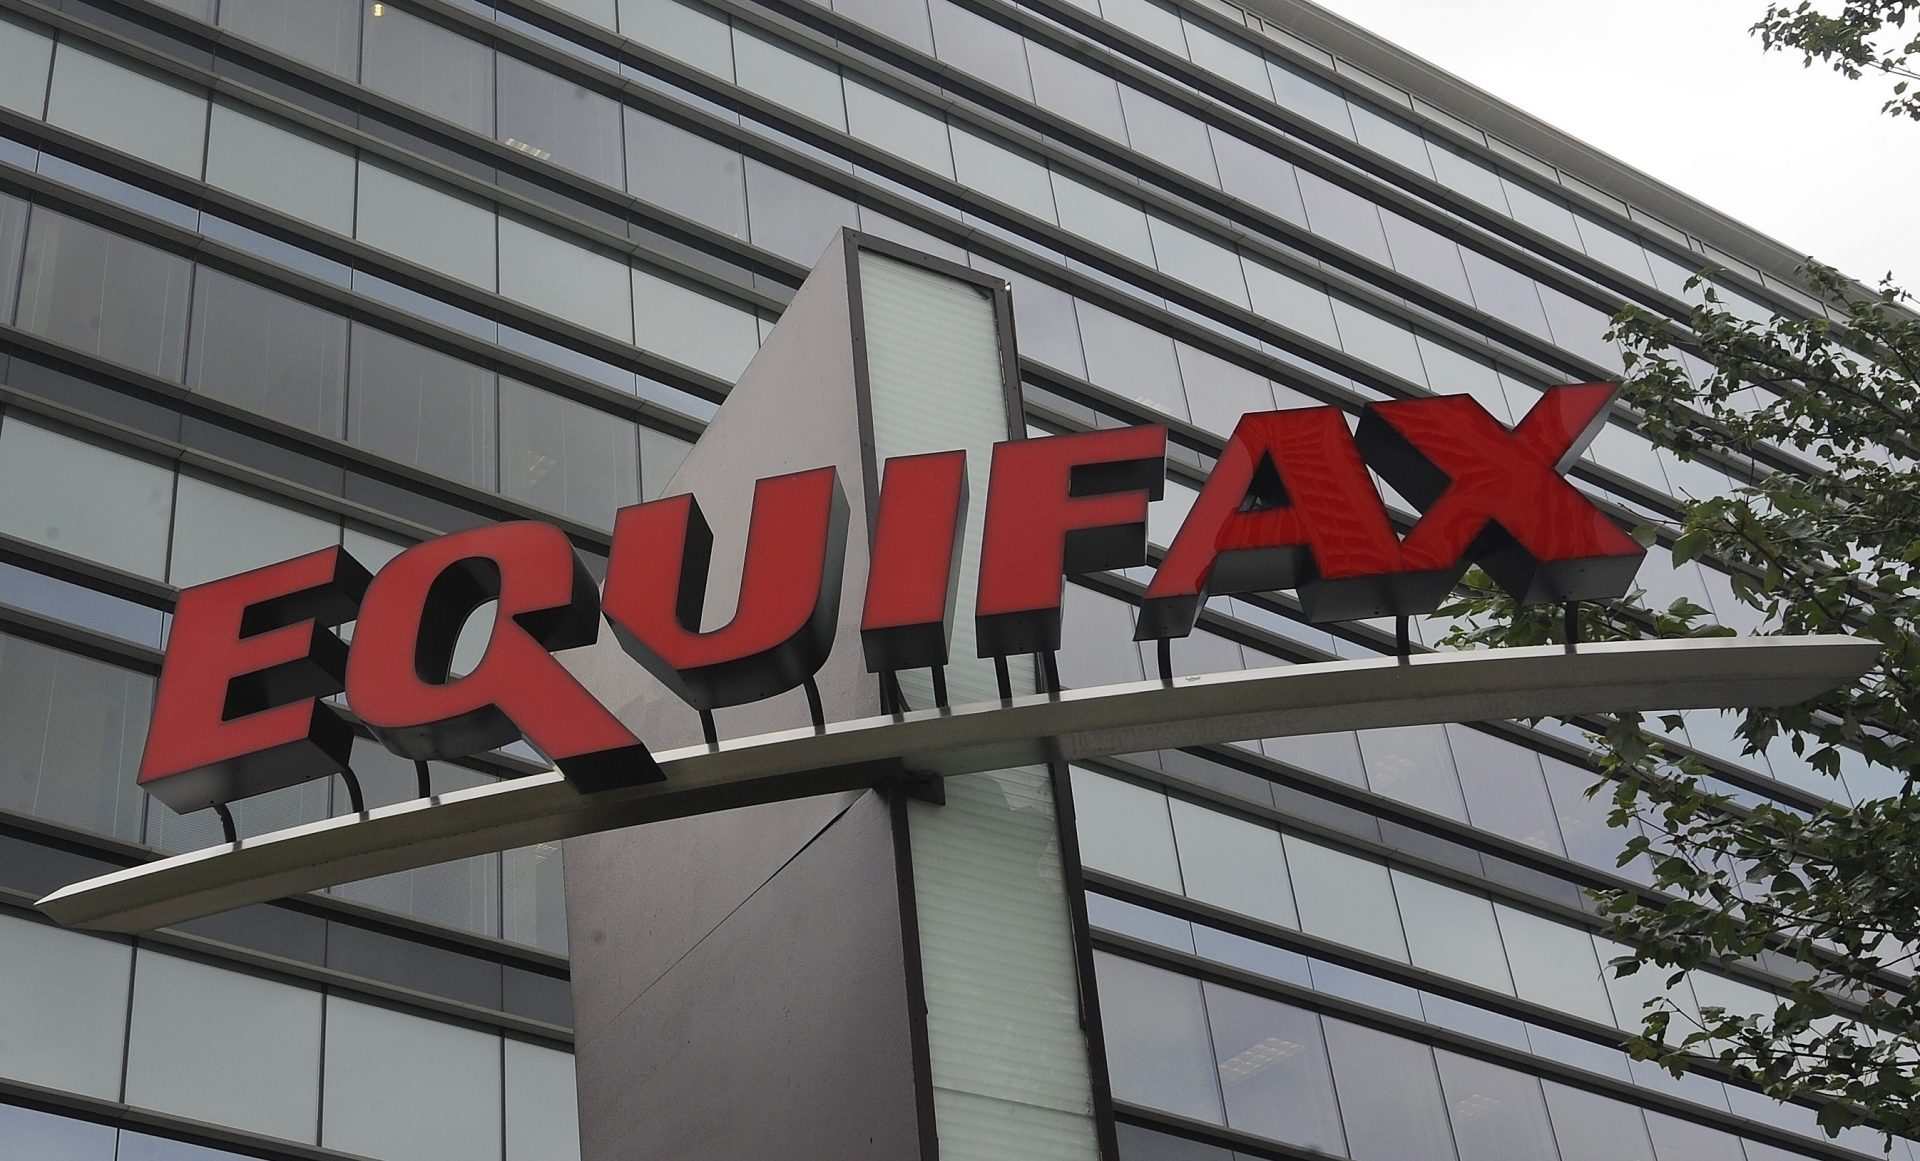 FILE- This July 21, 2012, file photo shows signage at the corporate headquarters of Equifax Inc. in Atlanta. The FTC on Wednesday, July 31, 2019, told consumers affected by the Equifax data breach that they are unlikely to get the full $125 cash payment that many sought.